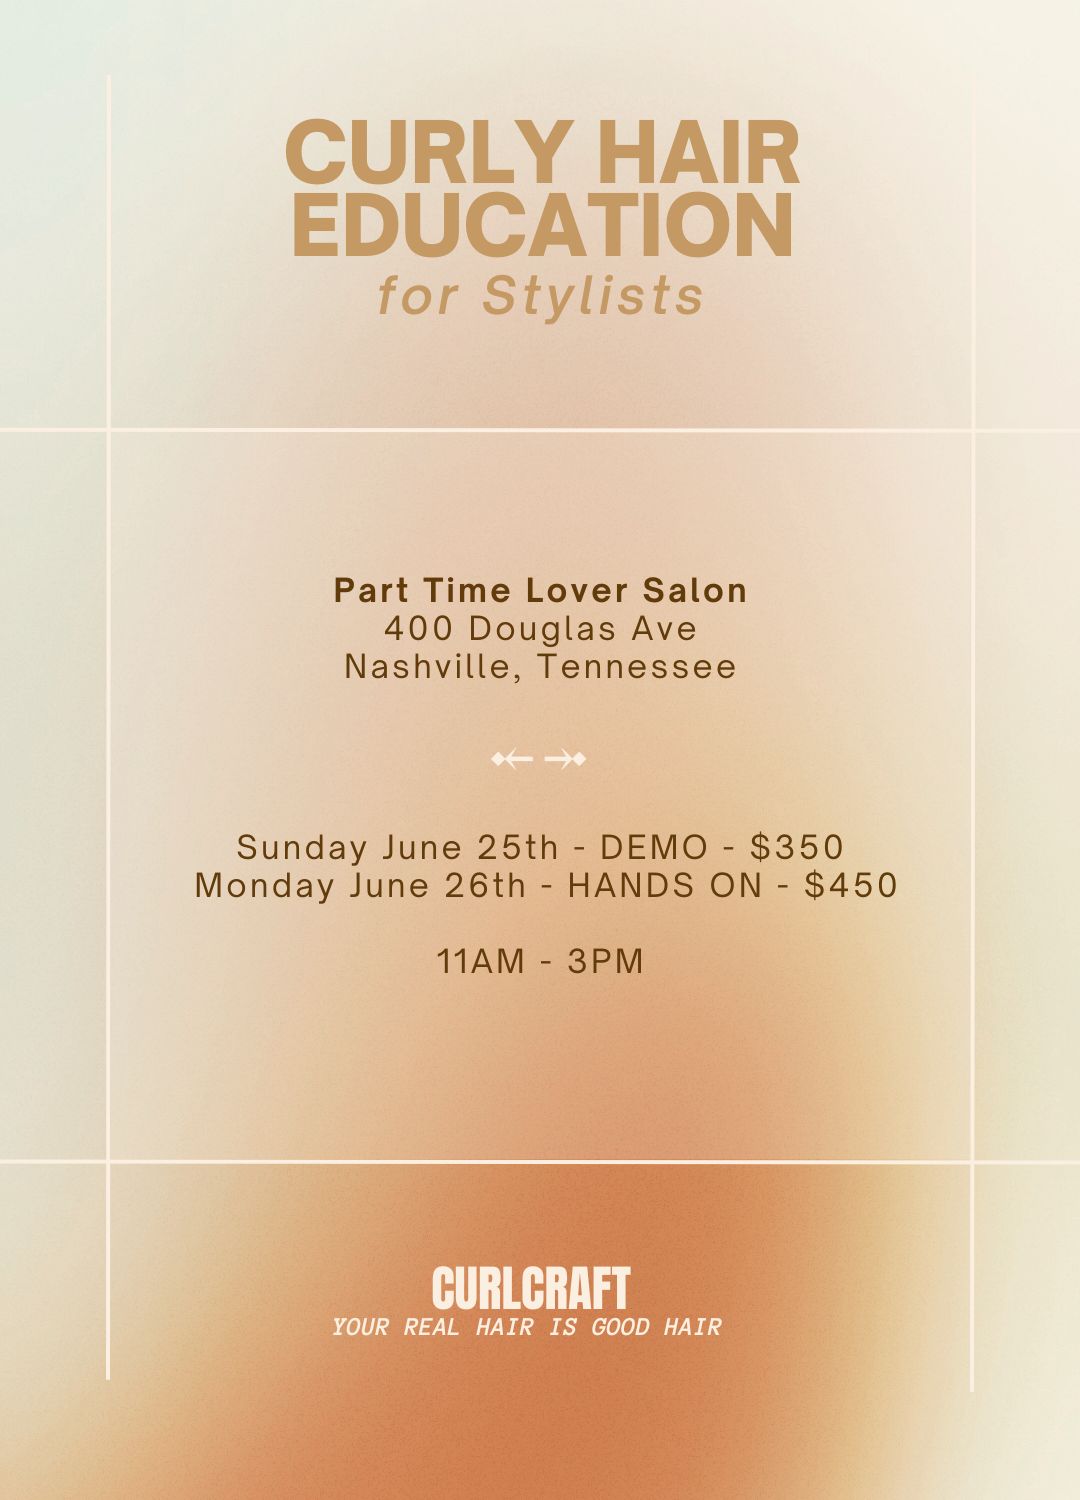 Flyer says: "Curly Hair Education for Stylists. Part Time Lover Salon - 400 Douglas Ave - Nashville, TN. Day 1: Sunday Jun 25th - DEMO for $350 - Day 2: Monday Jun 26th - HANDS-ON - $450 - 11AM - 3PM. CURLCRAFT. Your Real Hair Is Good Hair."